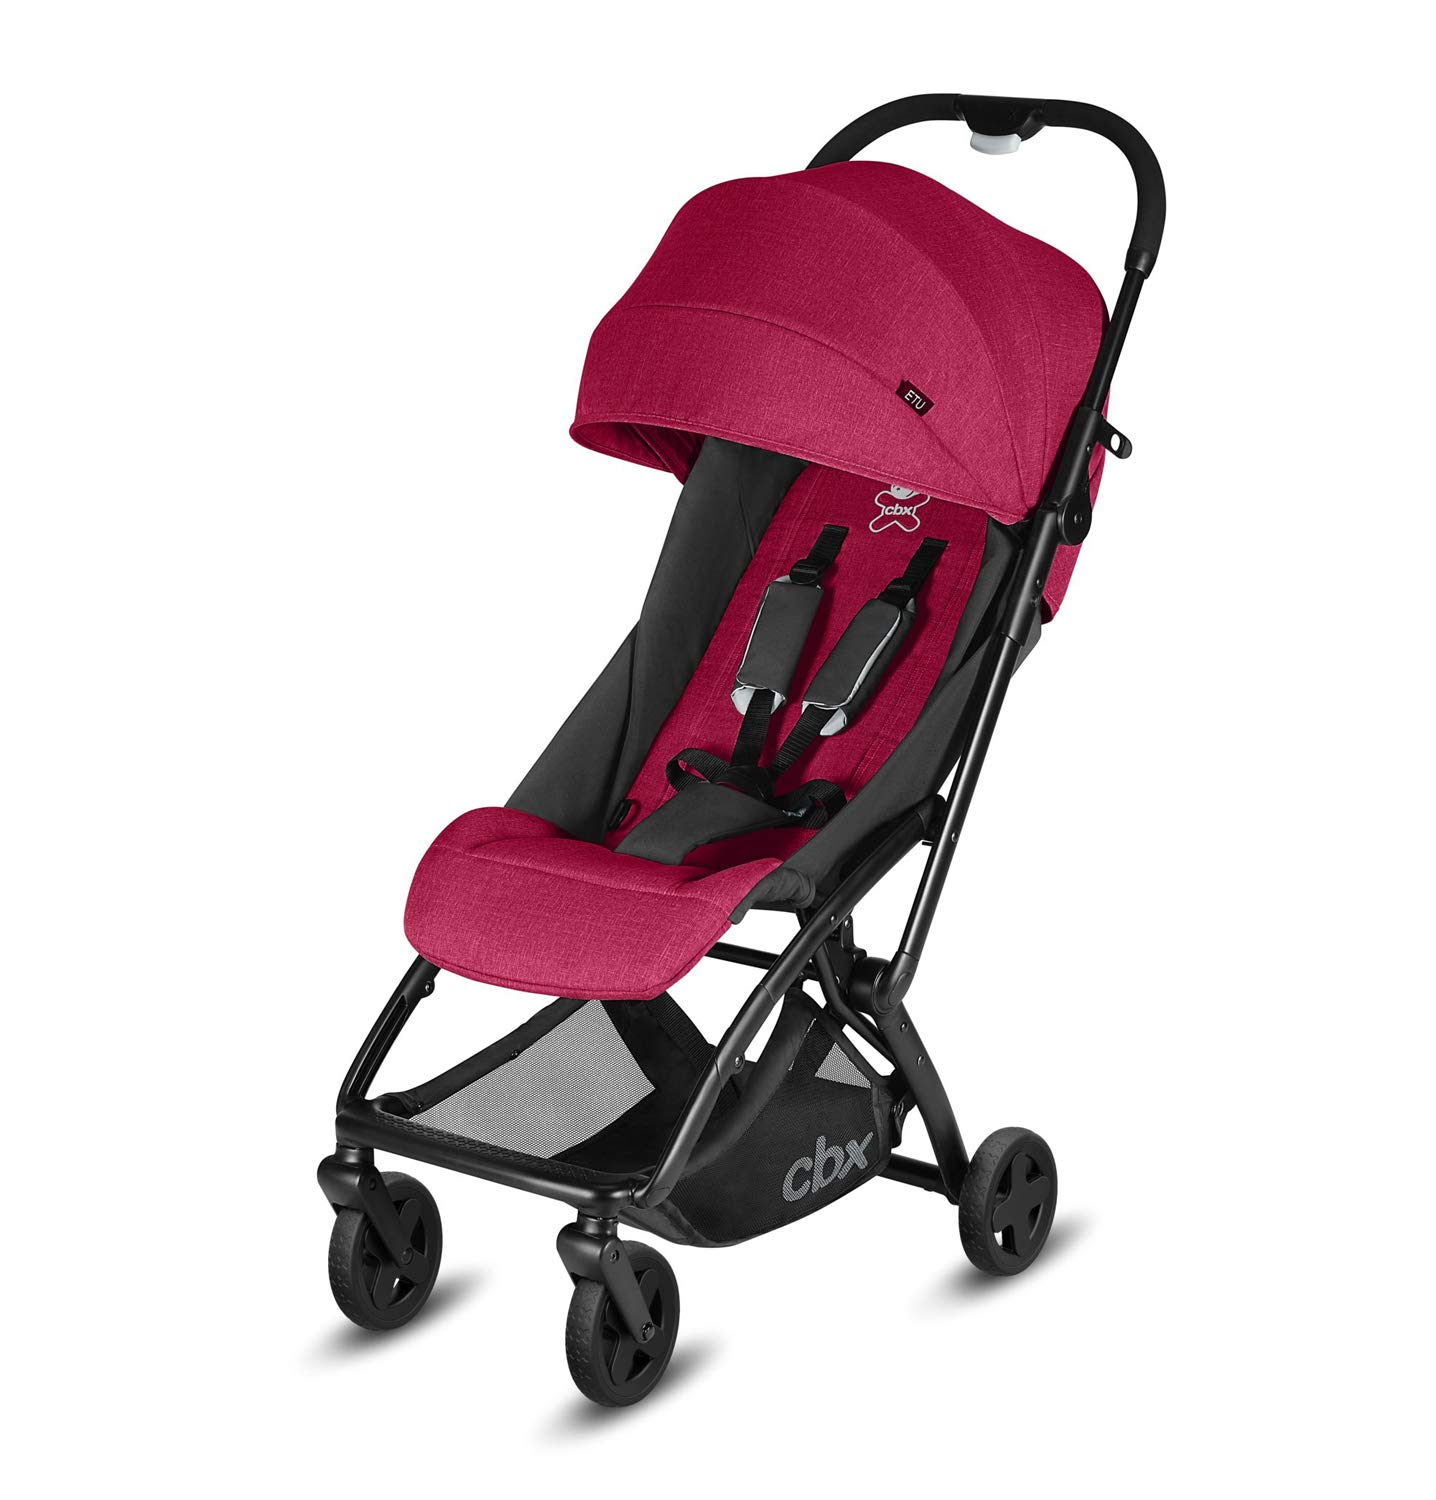 cbx Ultra Compact Buggy Case with Rain Cover from Birth to 15 kg Crunchy Red